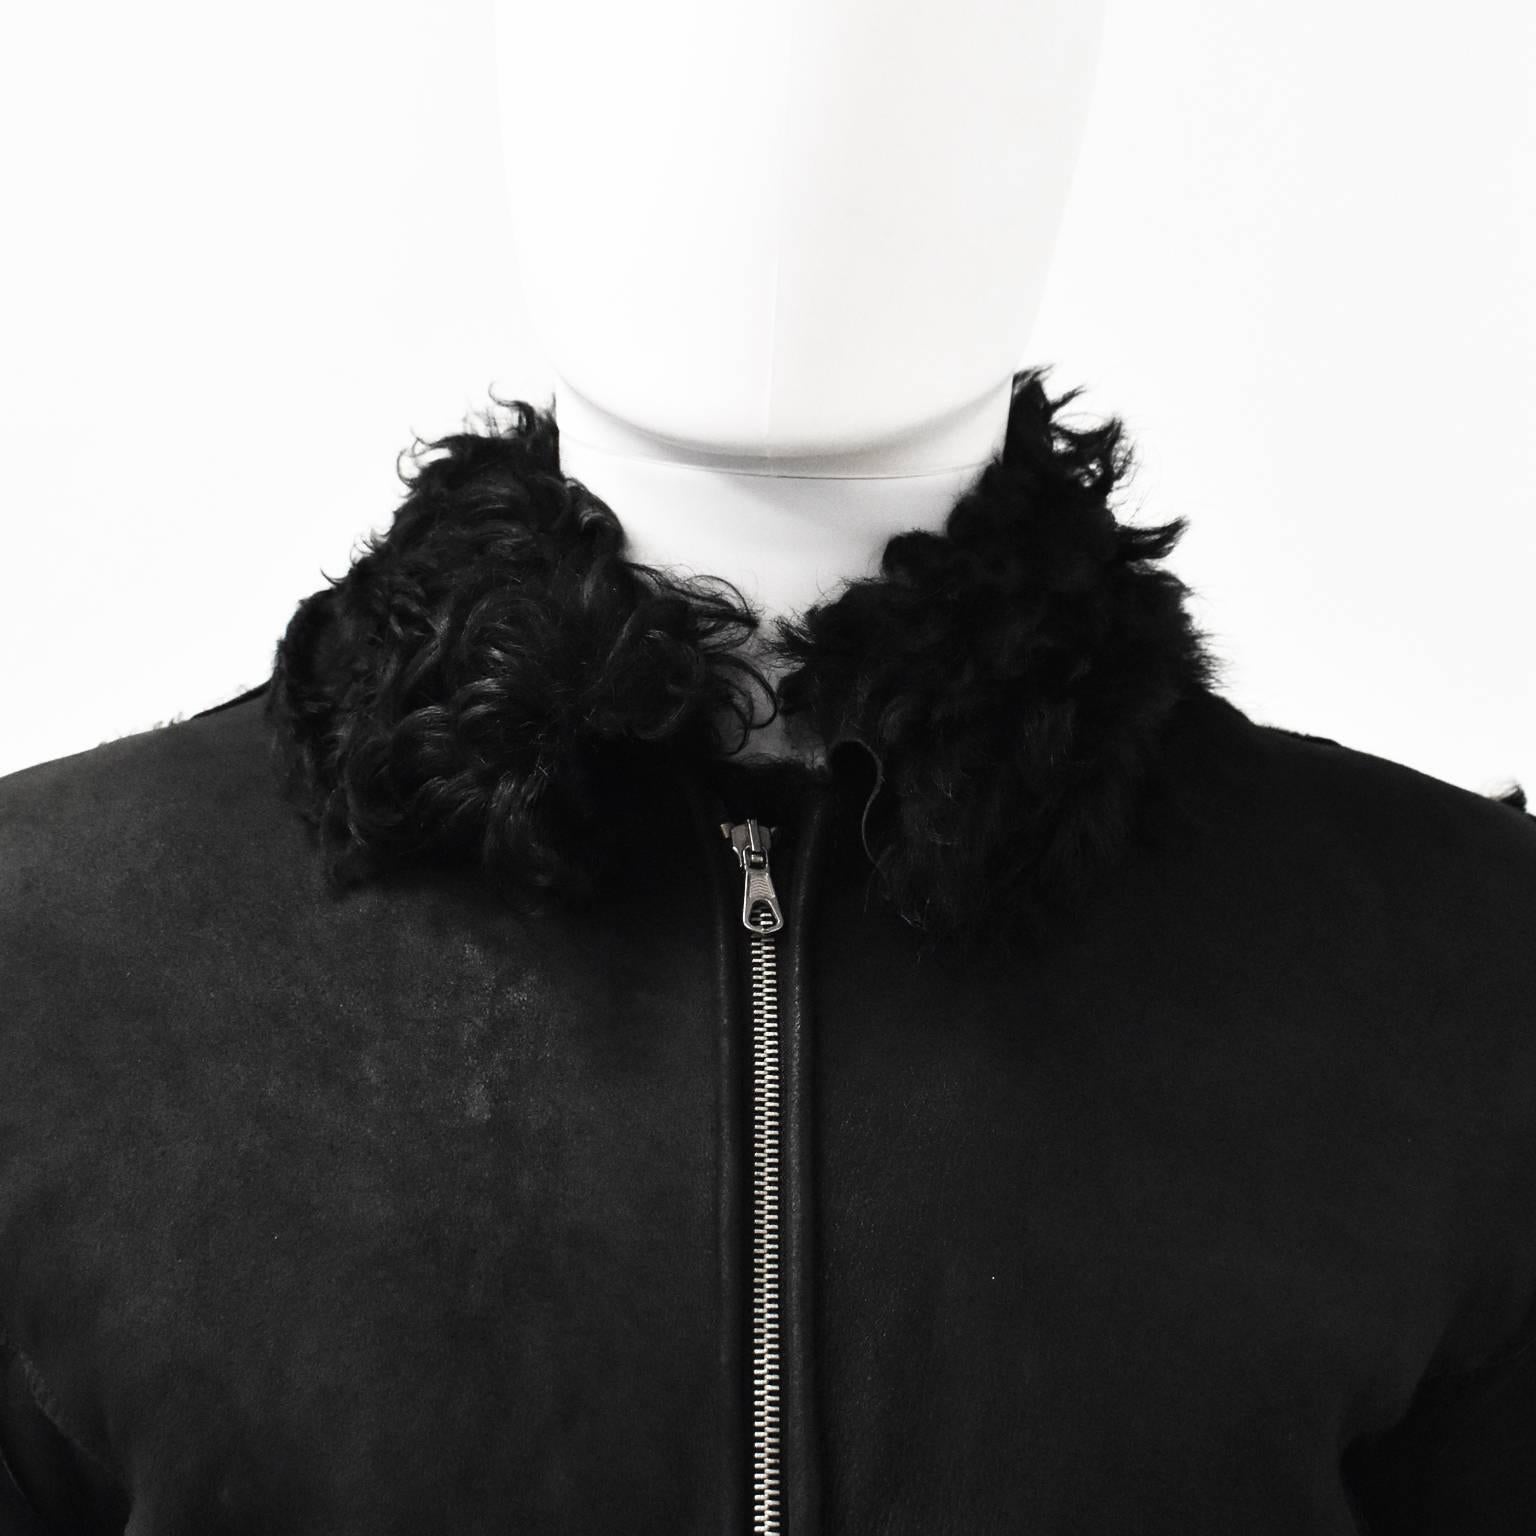 An unlabelled black Belgian shearling coat. It features a zip fastening, flared sleeves and shearling trimmings. It can be reversed and worn with the shearling as the outer fabric but the zip would have to be pulled from the inside of the jacket. It